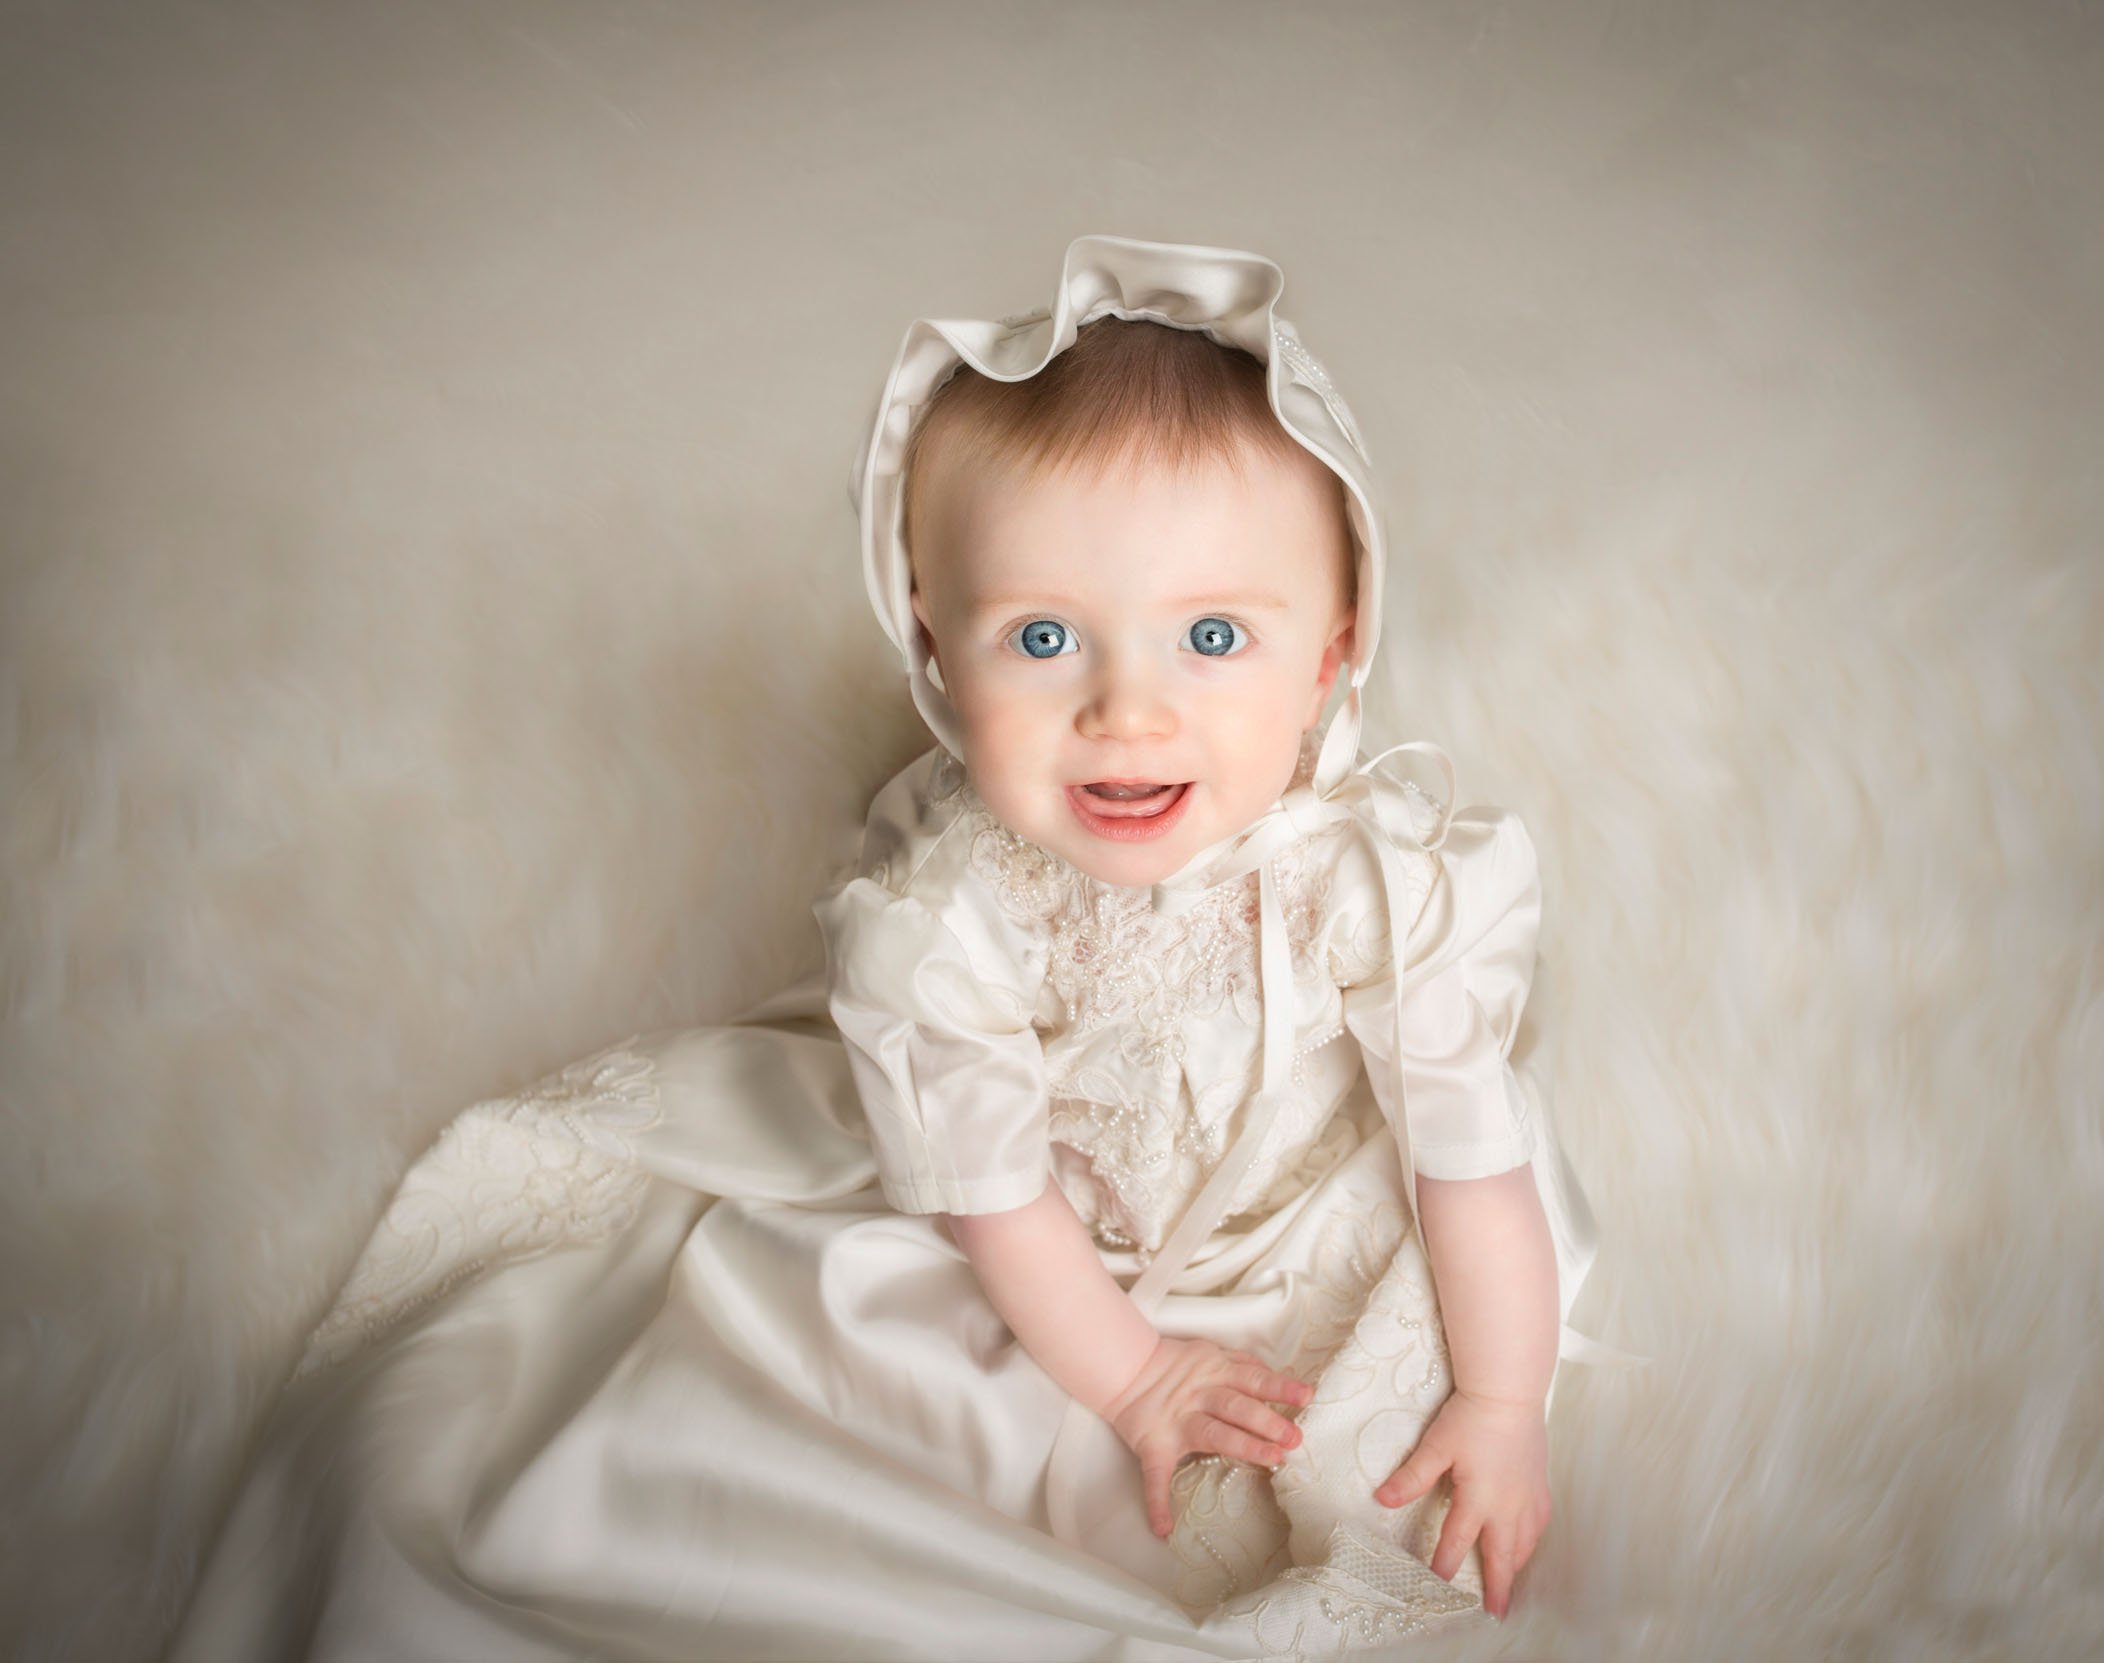 6 mo old little girl dressed in her Christening gown looking at the camera